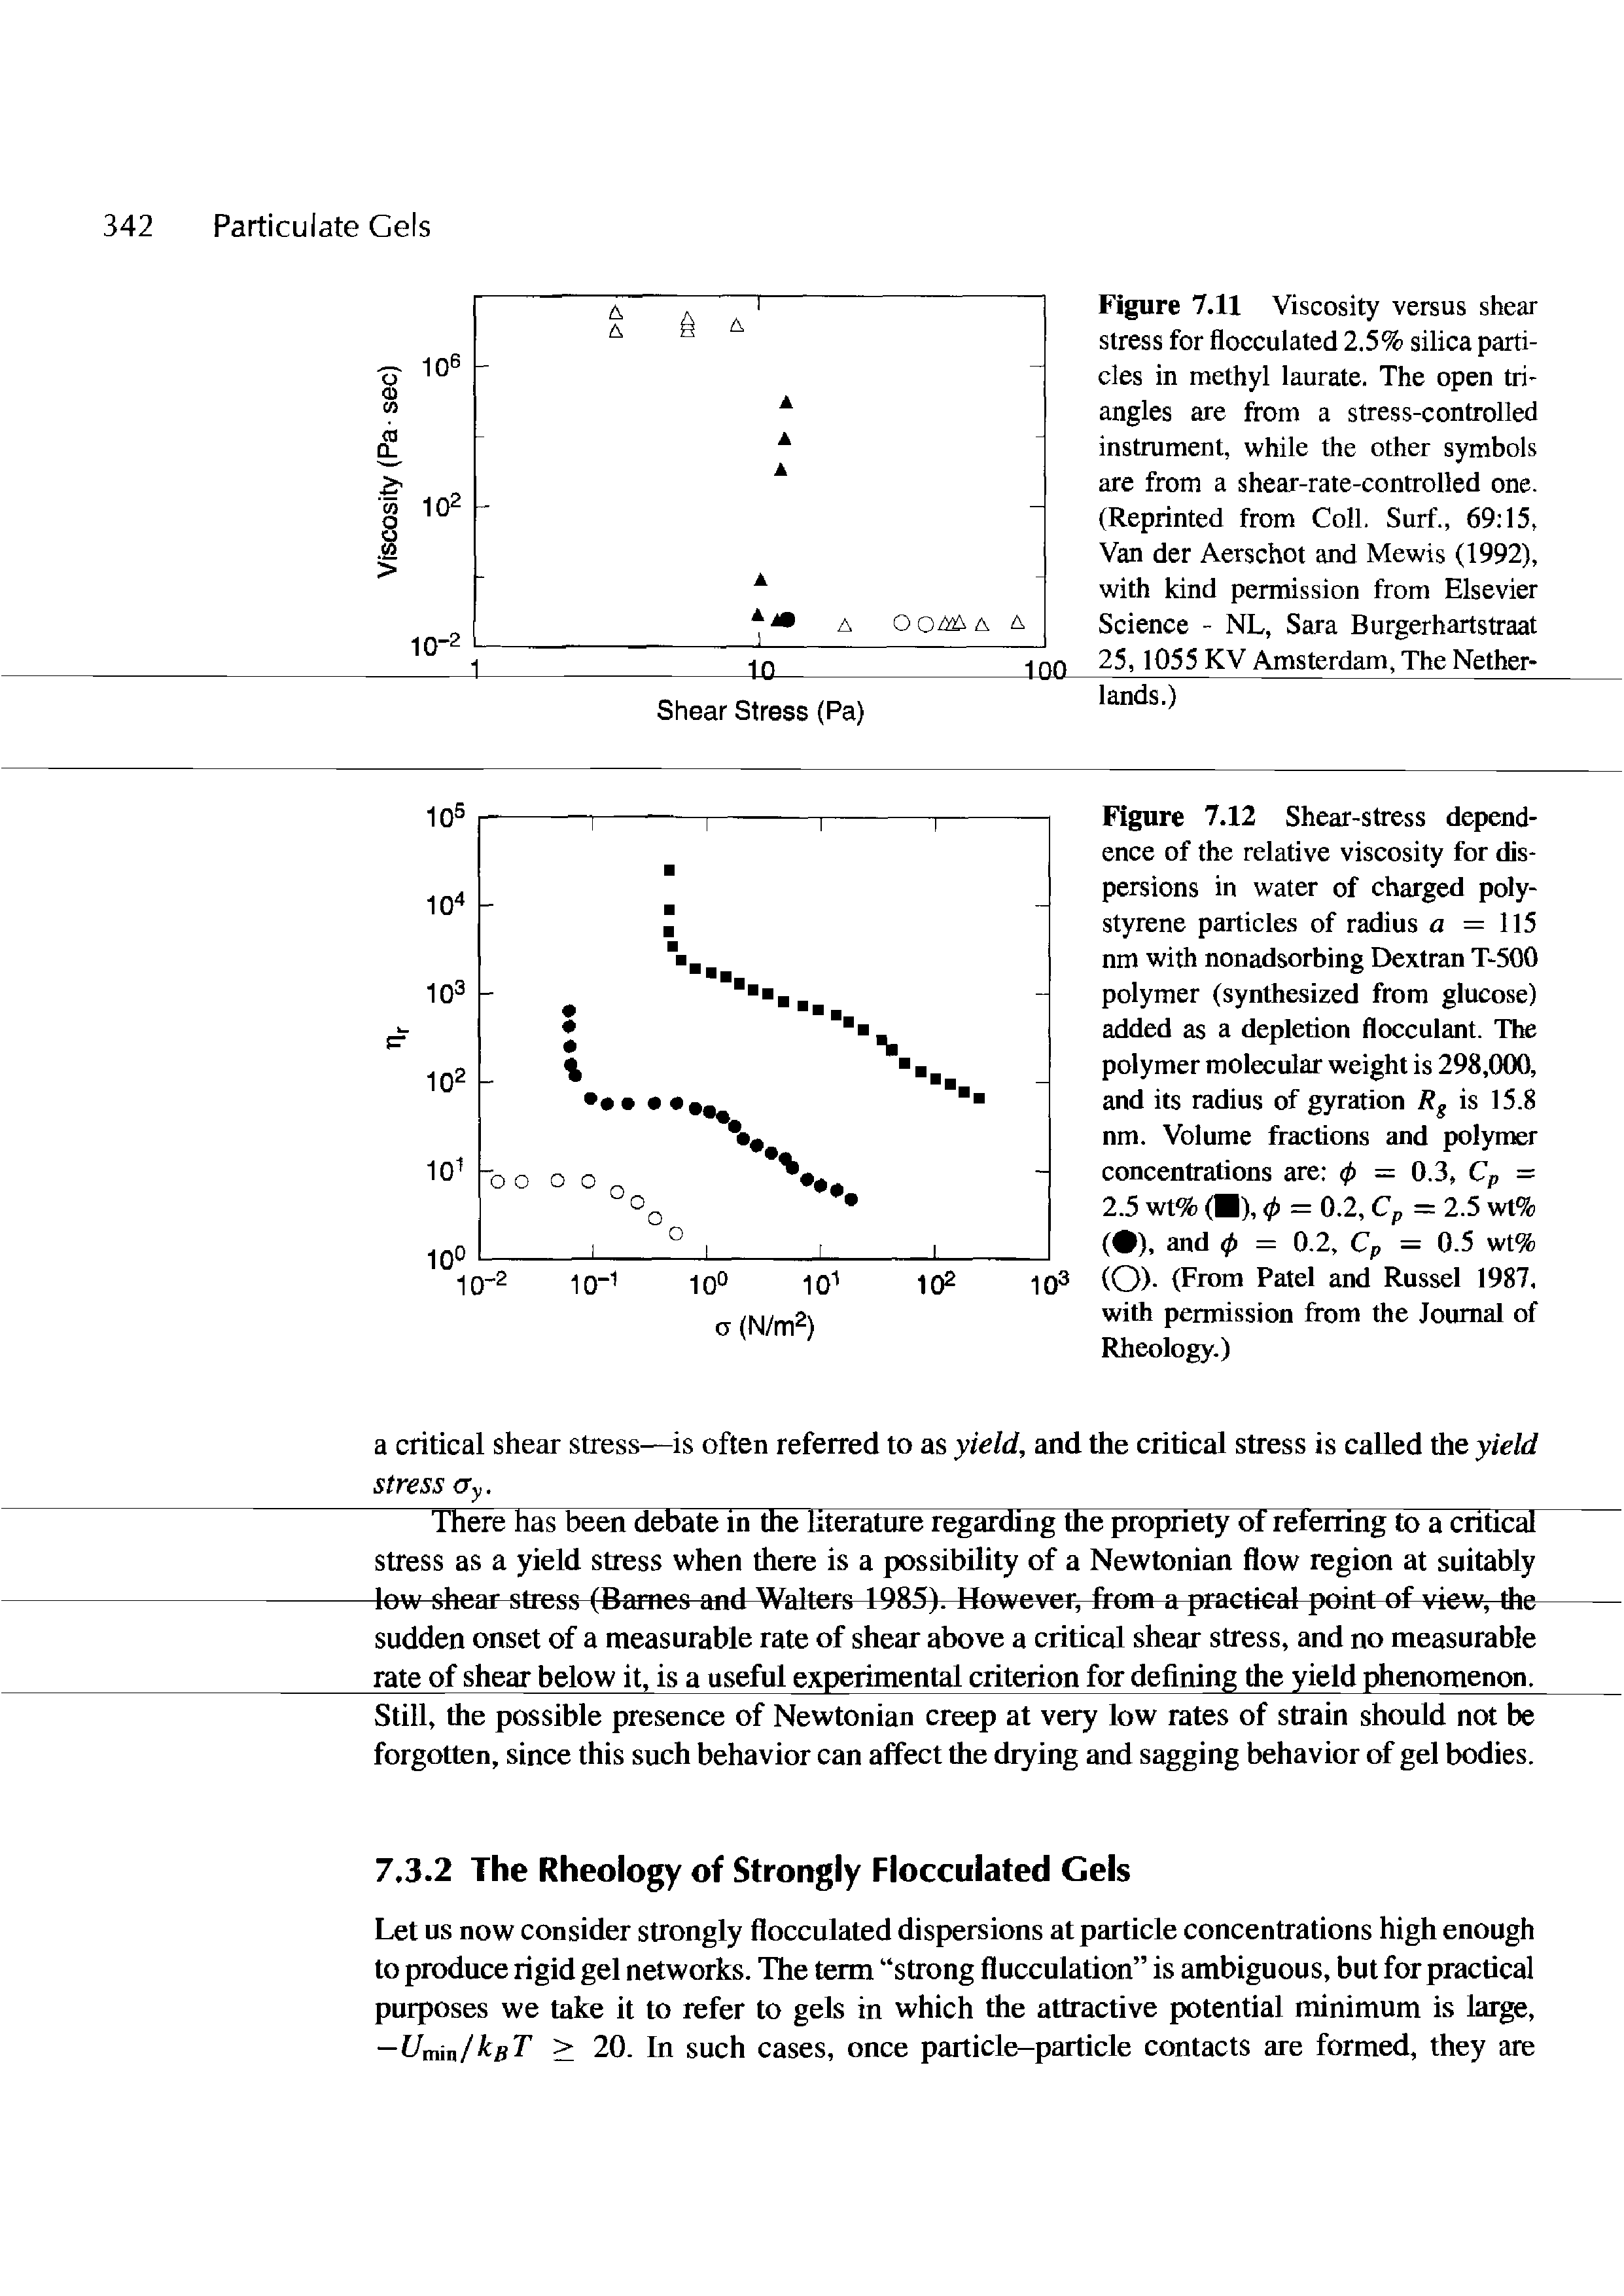 Figure 7.11 Viscosity versus shear stress for flocculated 2.5% silica particles in methyl laurate. The open triangles are from a stress-controlled instrument, while the other symbols are from a shear-rate-controlled one. (Reprinted from Coll. Surf., 69 15, Van der Aerschot and Mewis (1992), with kind permission from Elsevier Science - NL, Sara Burgerhartstraat 25,1055 KV Amsterdam, The Netherlands.)...